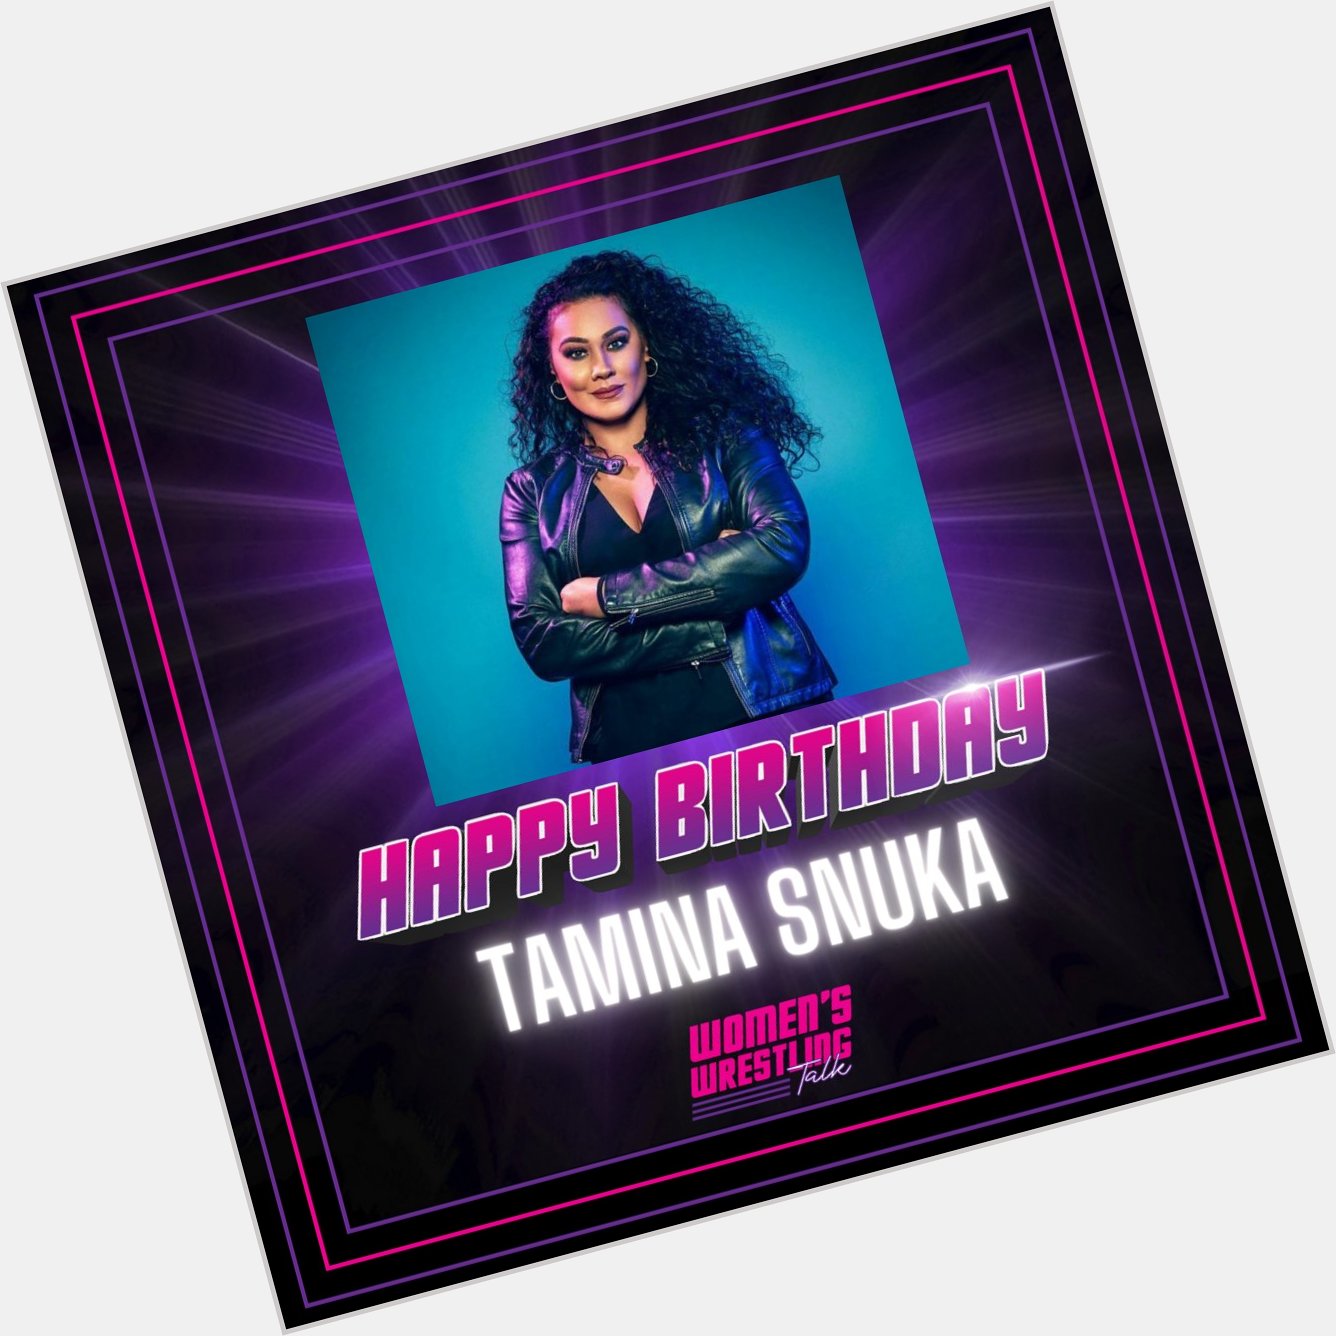 Happy birthday to the gorgeous Tamina Snuka, we hope you have a wonderful day!    